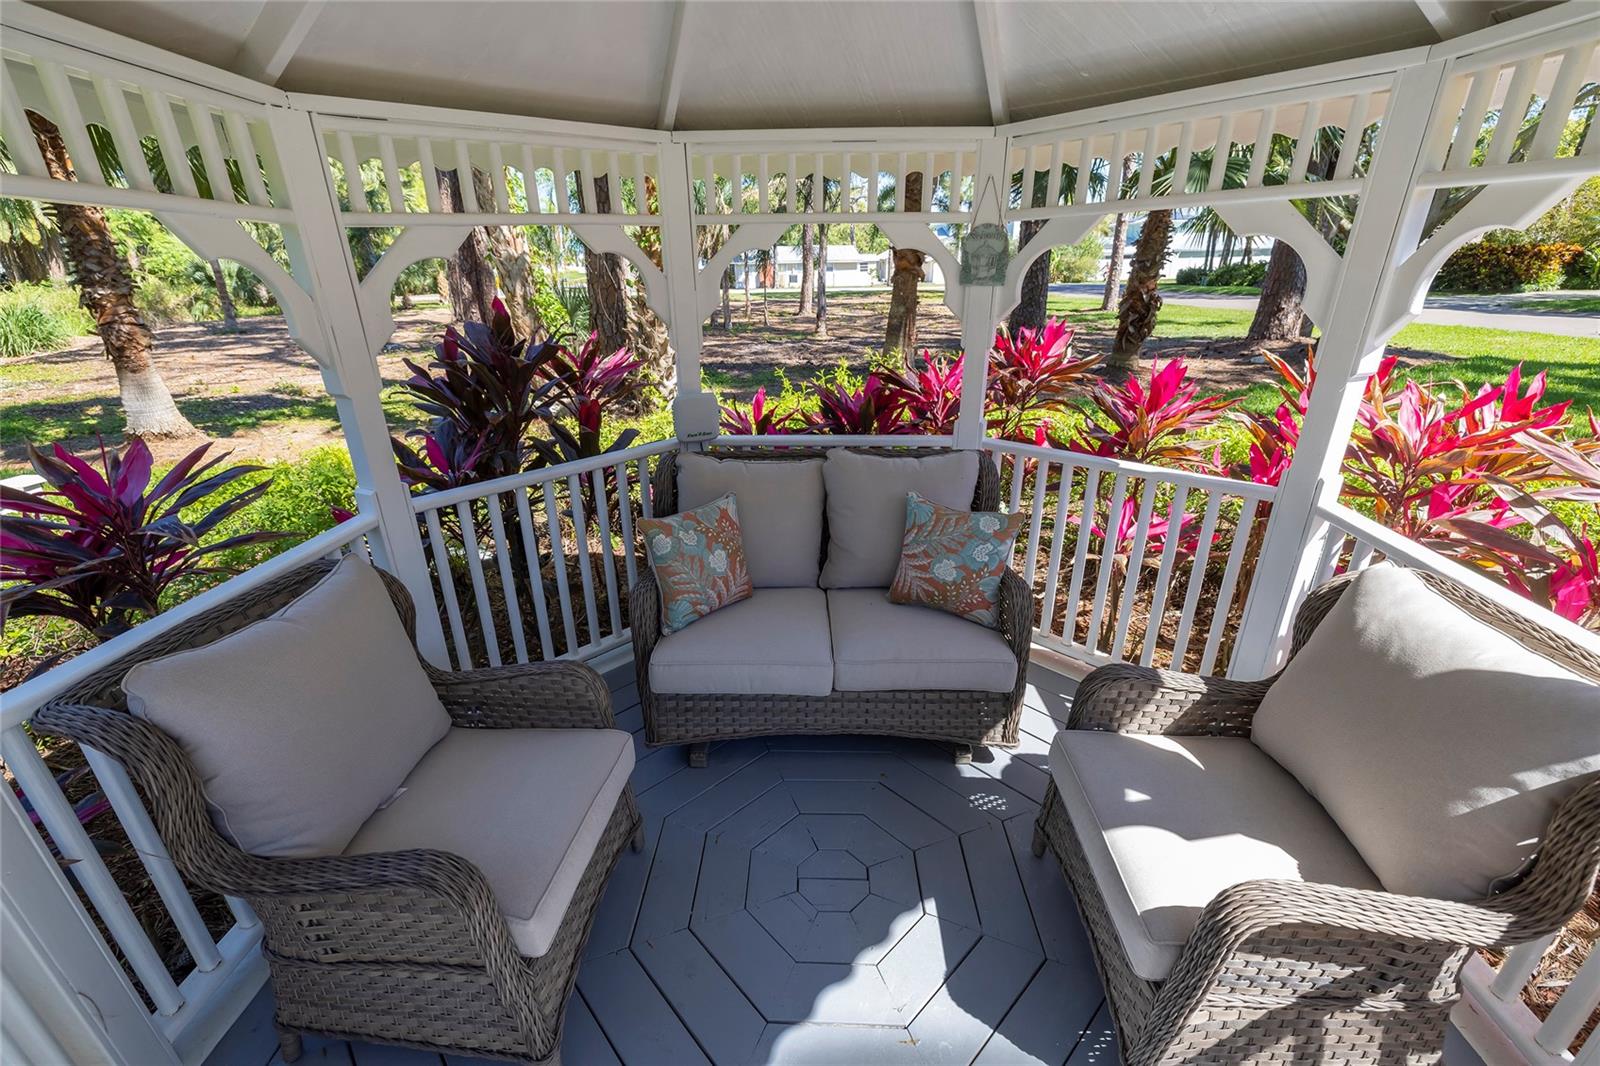 Outdoor Cabana offers an incredible get away space to relax and enjoy the day